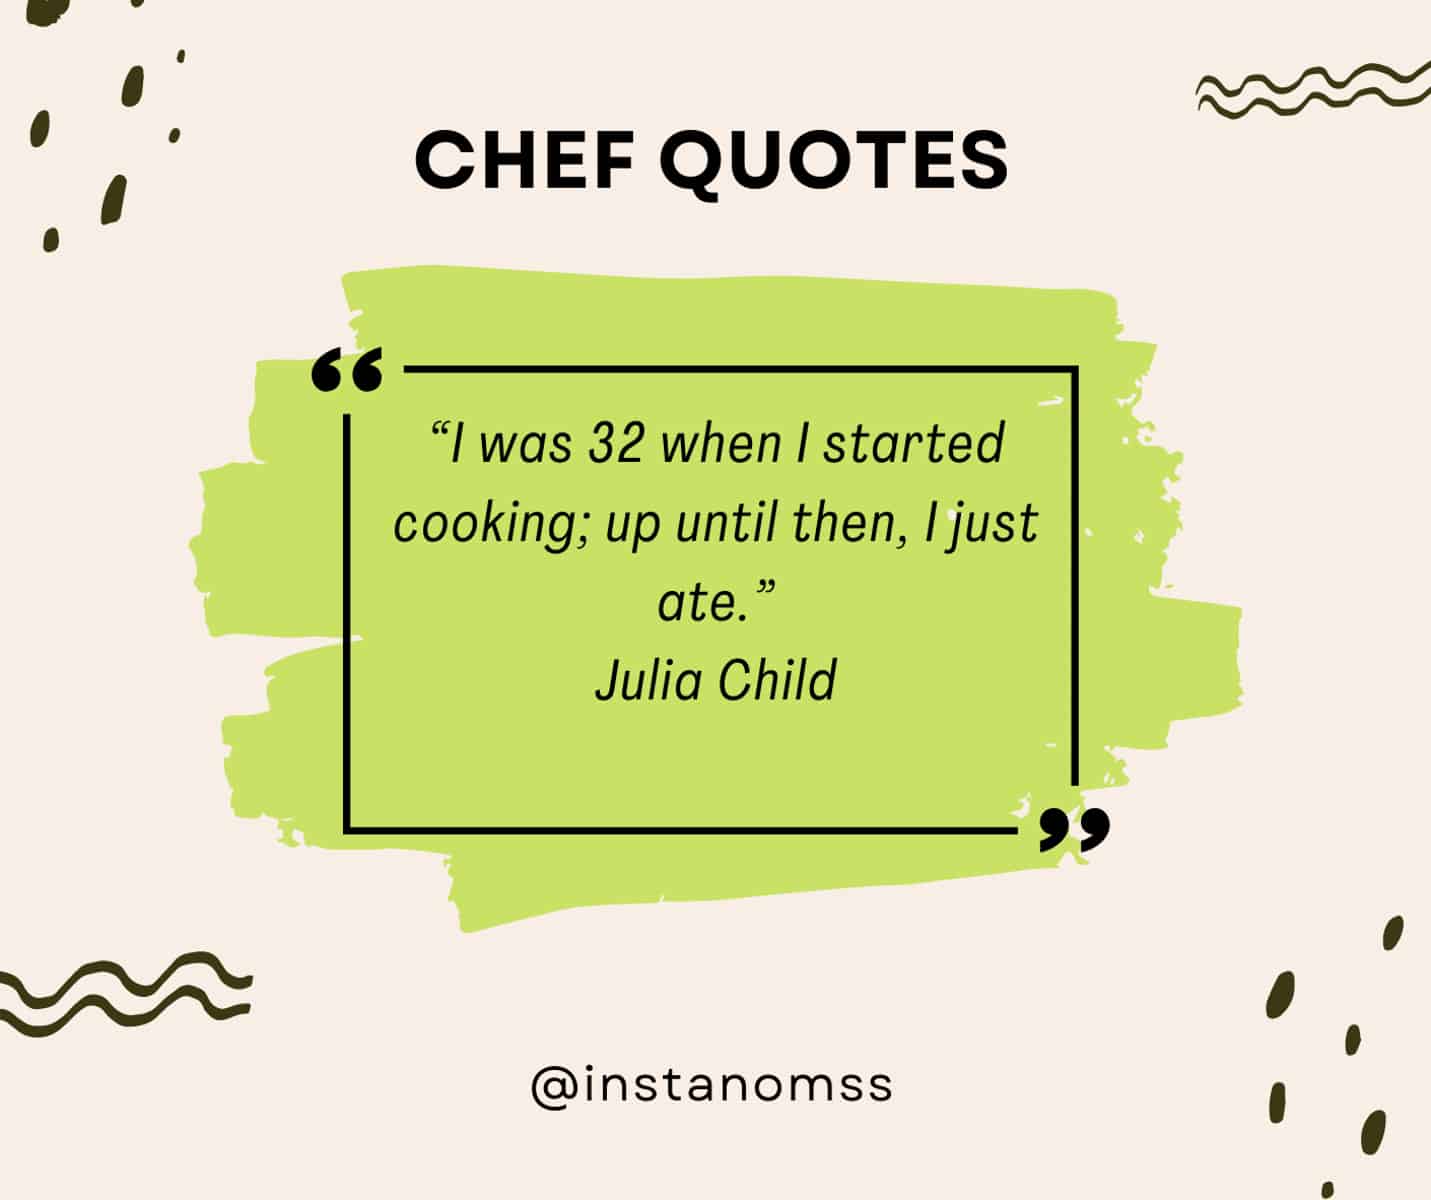 “I was 32 when I started cooking; up until then, I just ate.” Julia Child